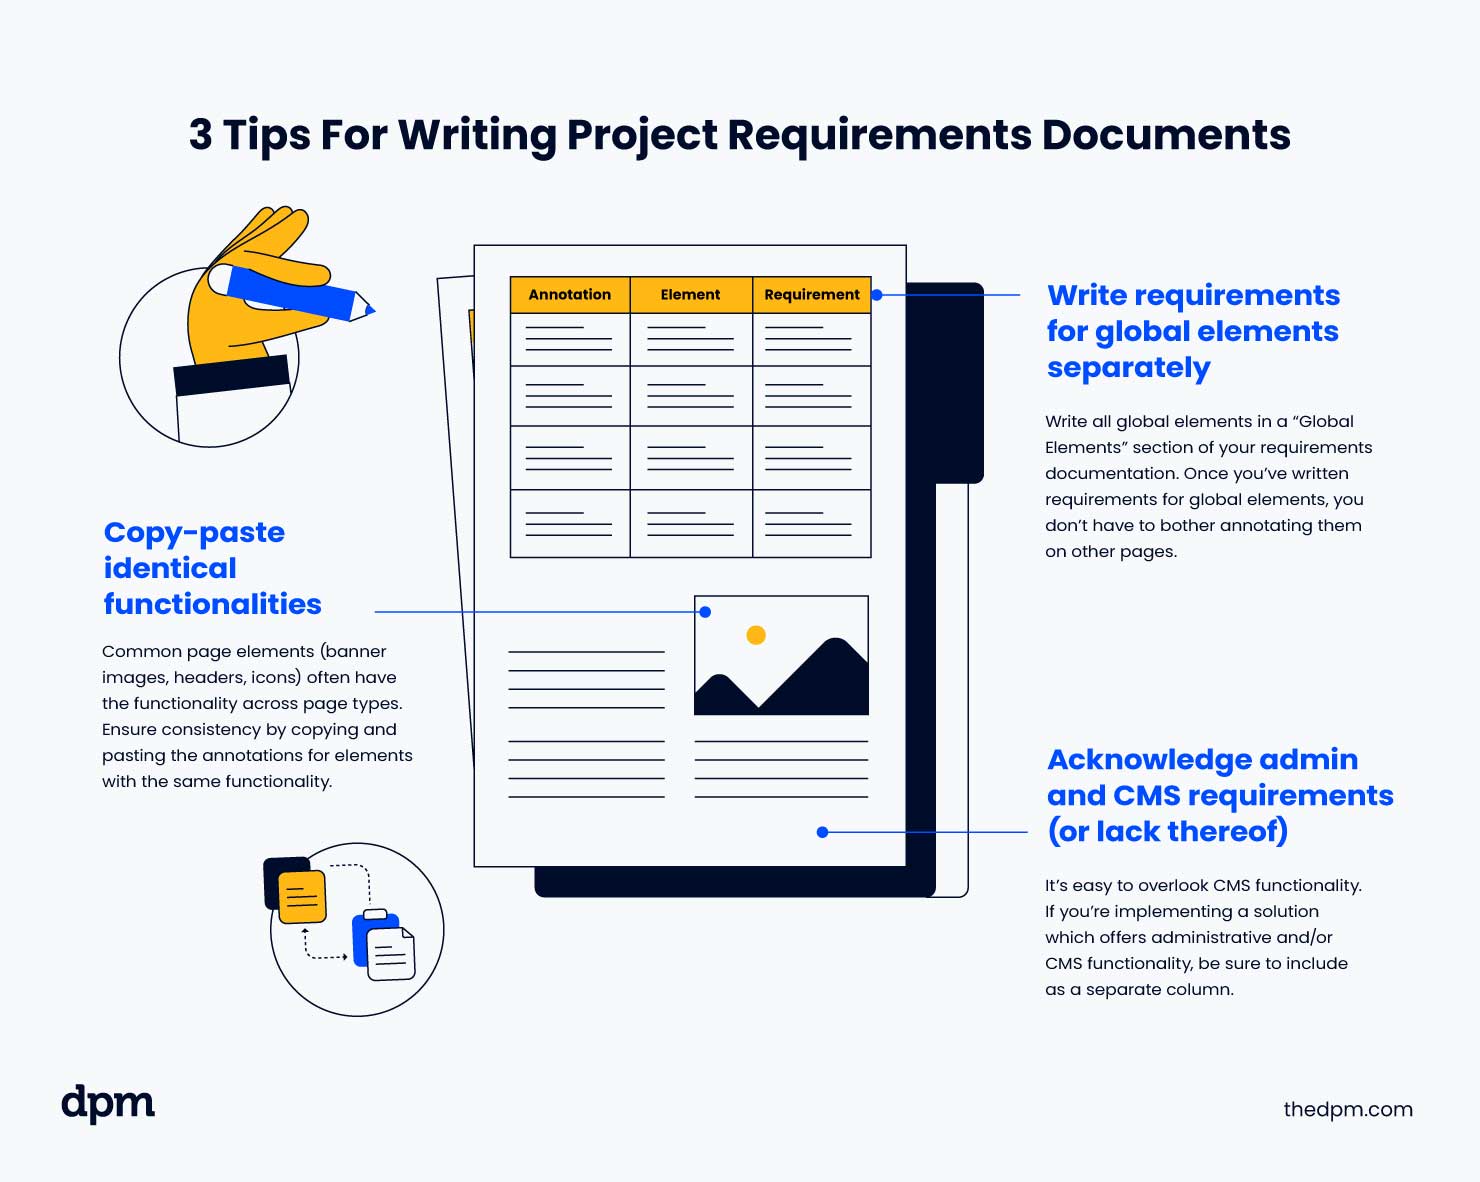 3 tips for writing project requirements documents